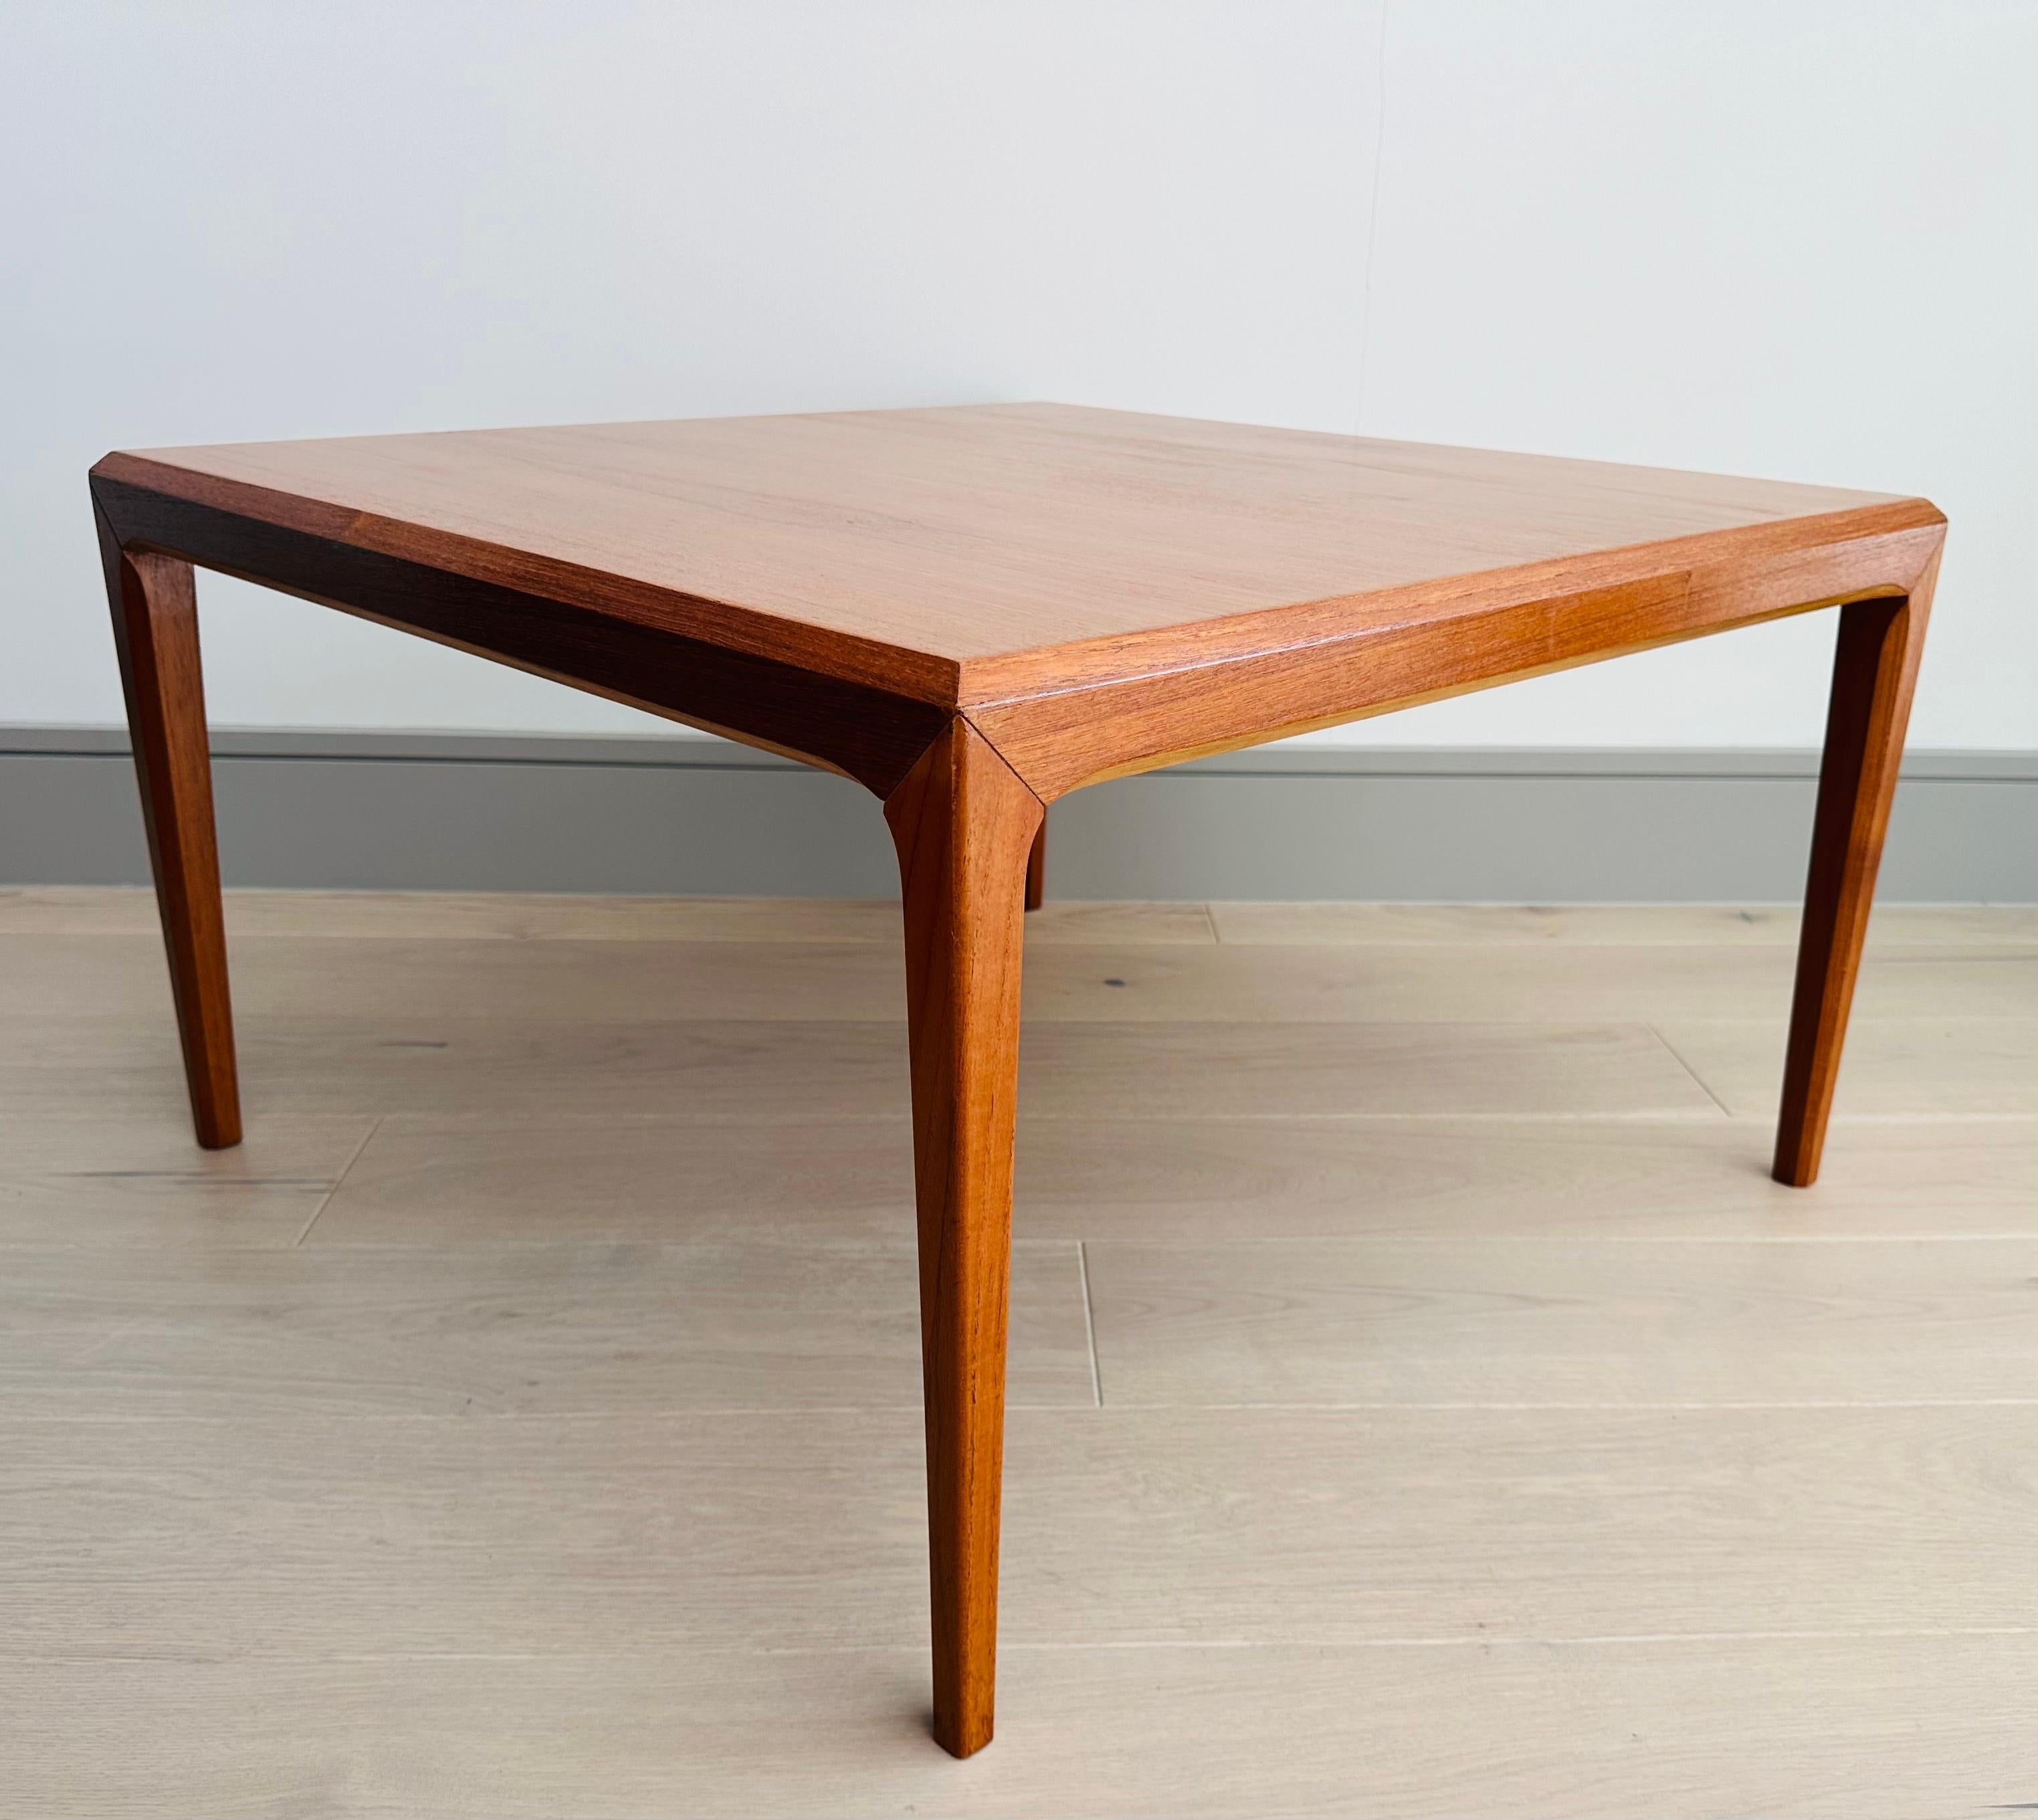 1960s Danish teak square low coffee table designed by Johannes Andersen and manufactured by Silkeborg Furniture.  The coffee table features chamfered edges and feature joints with a slight gap where the legs meet the table top.  The chamfered